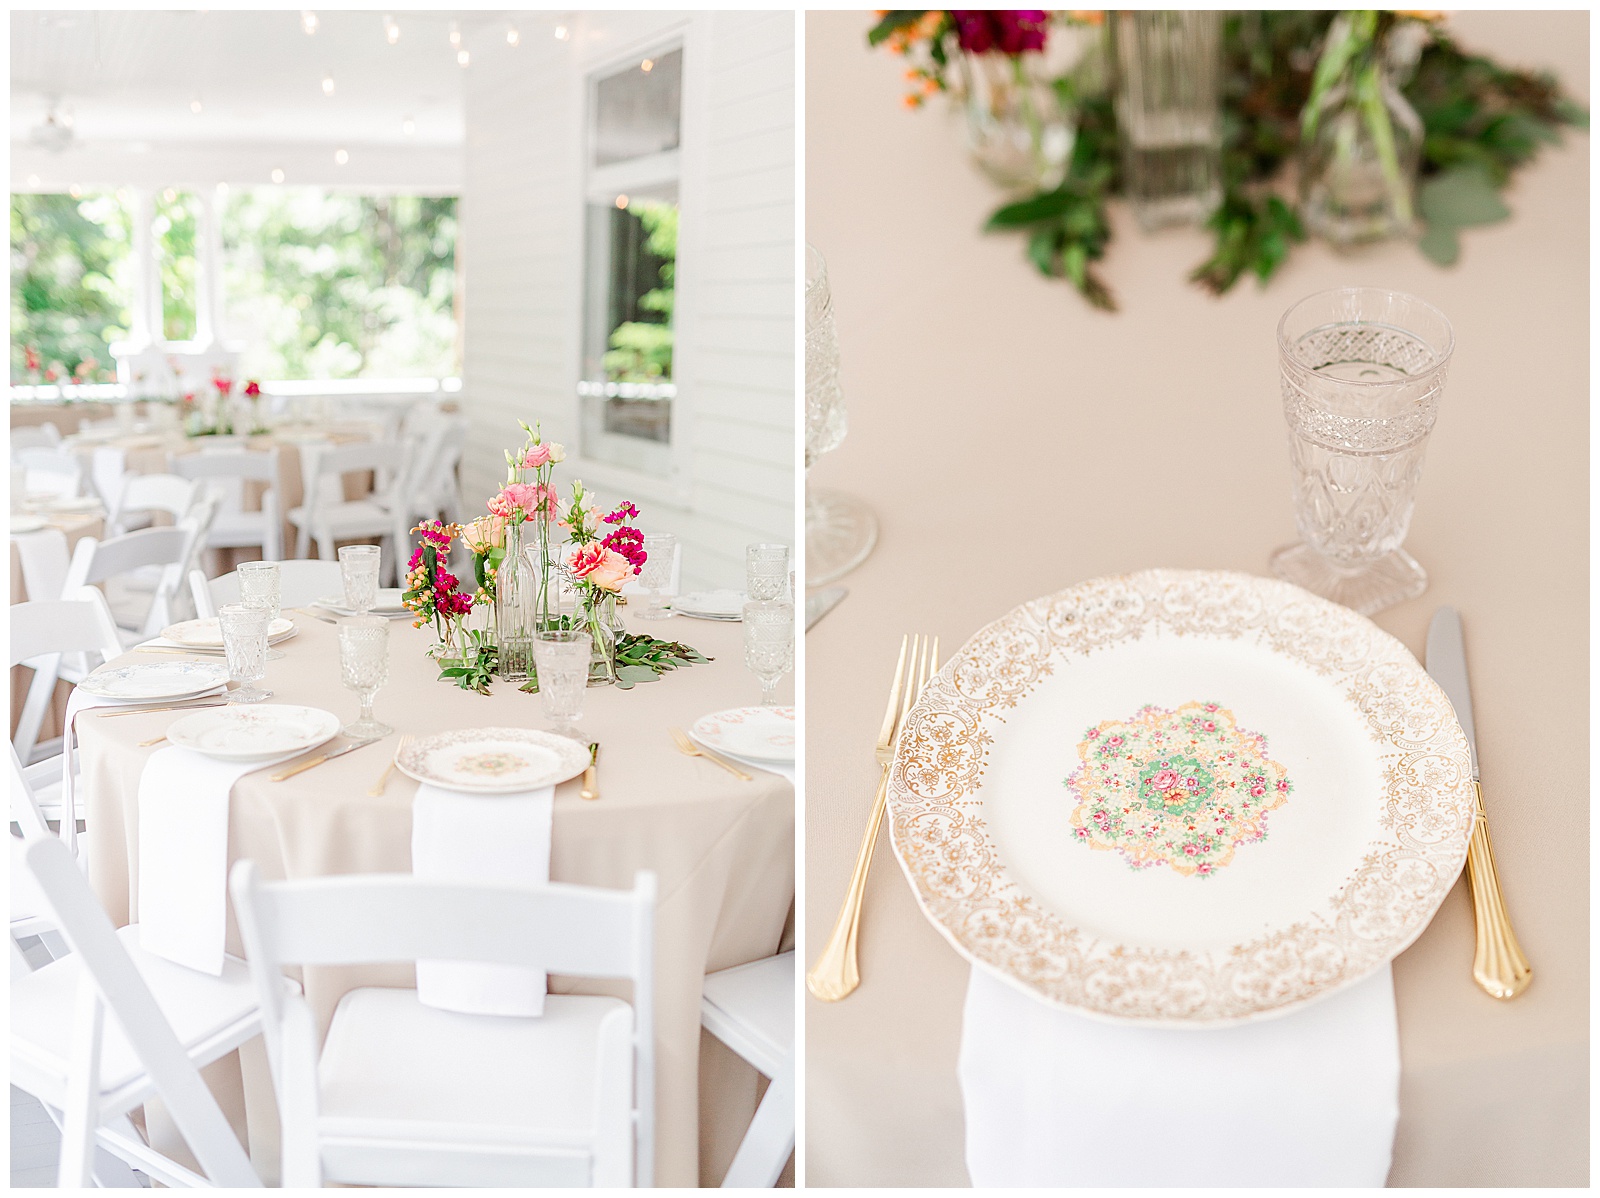 Enchanting white table setting and bright floral centerpiece from Boho Chic Summer Wedding in Charlotte, NC | check out the full wedding at KevynDixonPhoto.com 